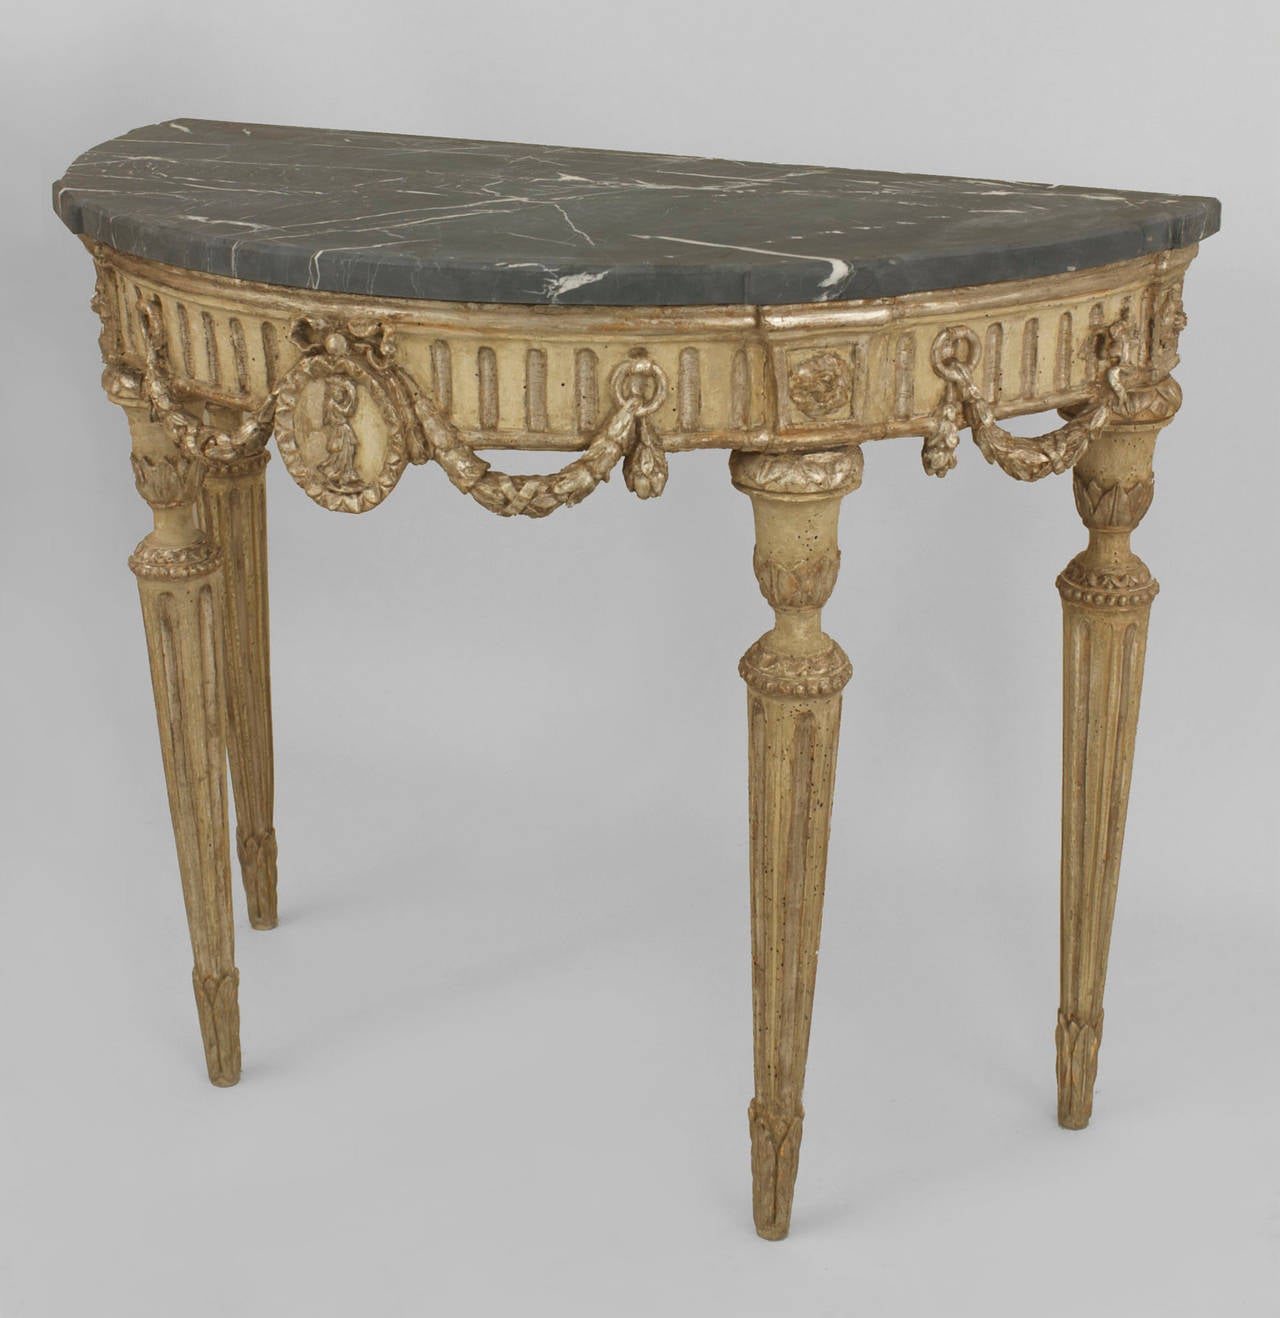 Painted Pair of 18th Century Italian Neoclassical Silver Gilt Demilune Consoles